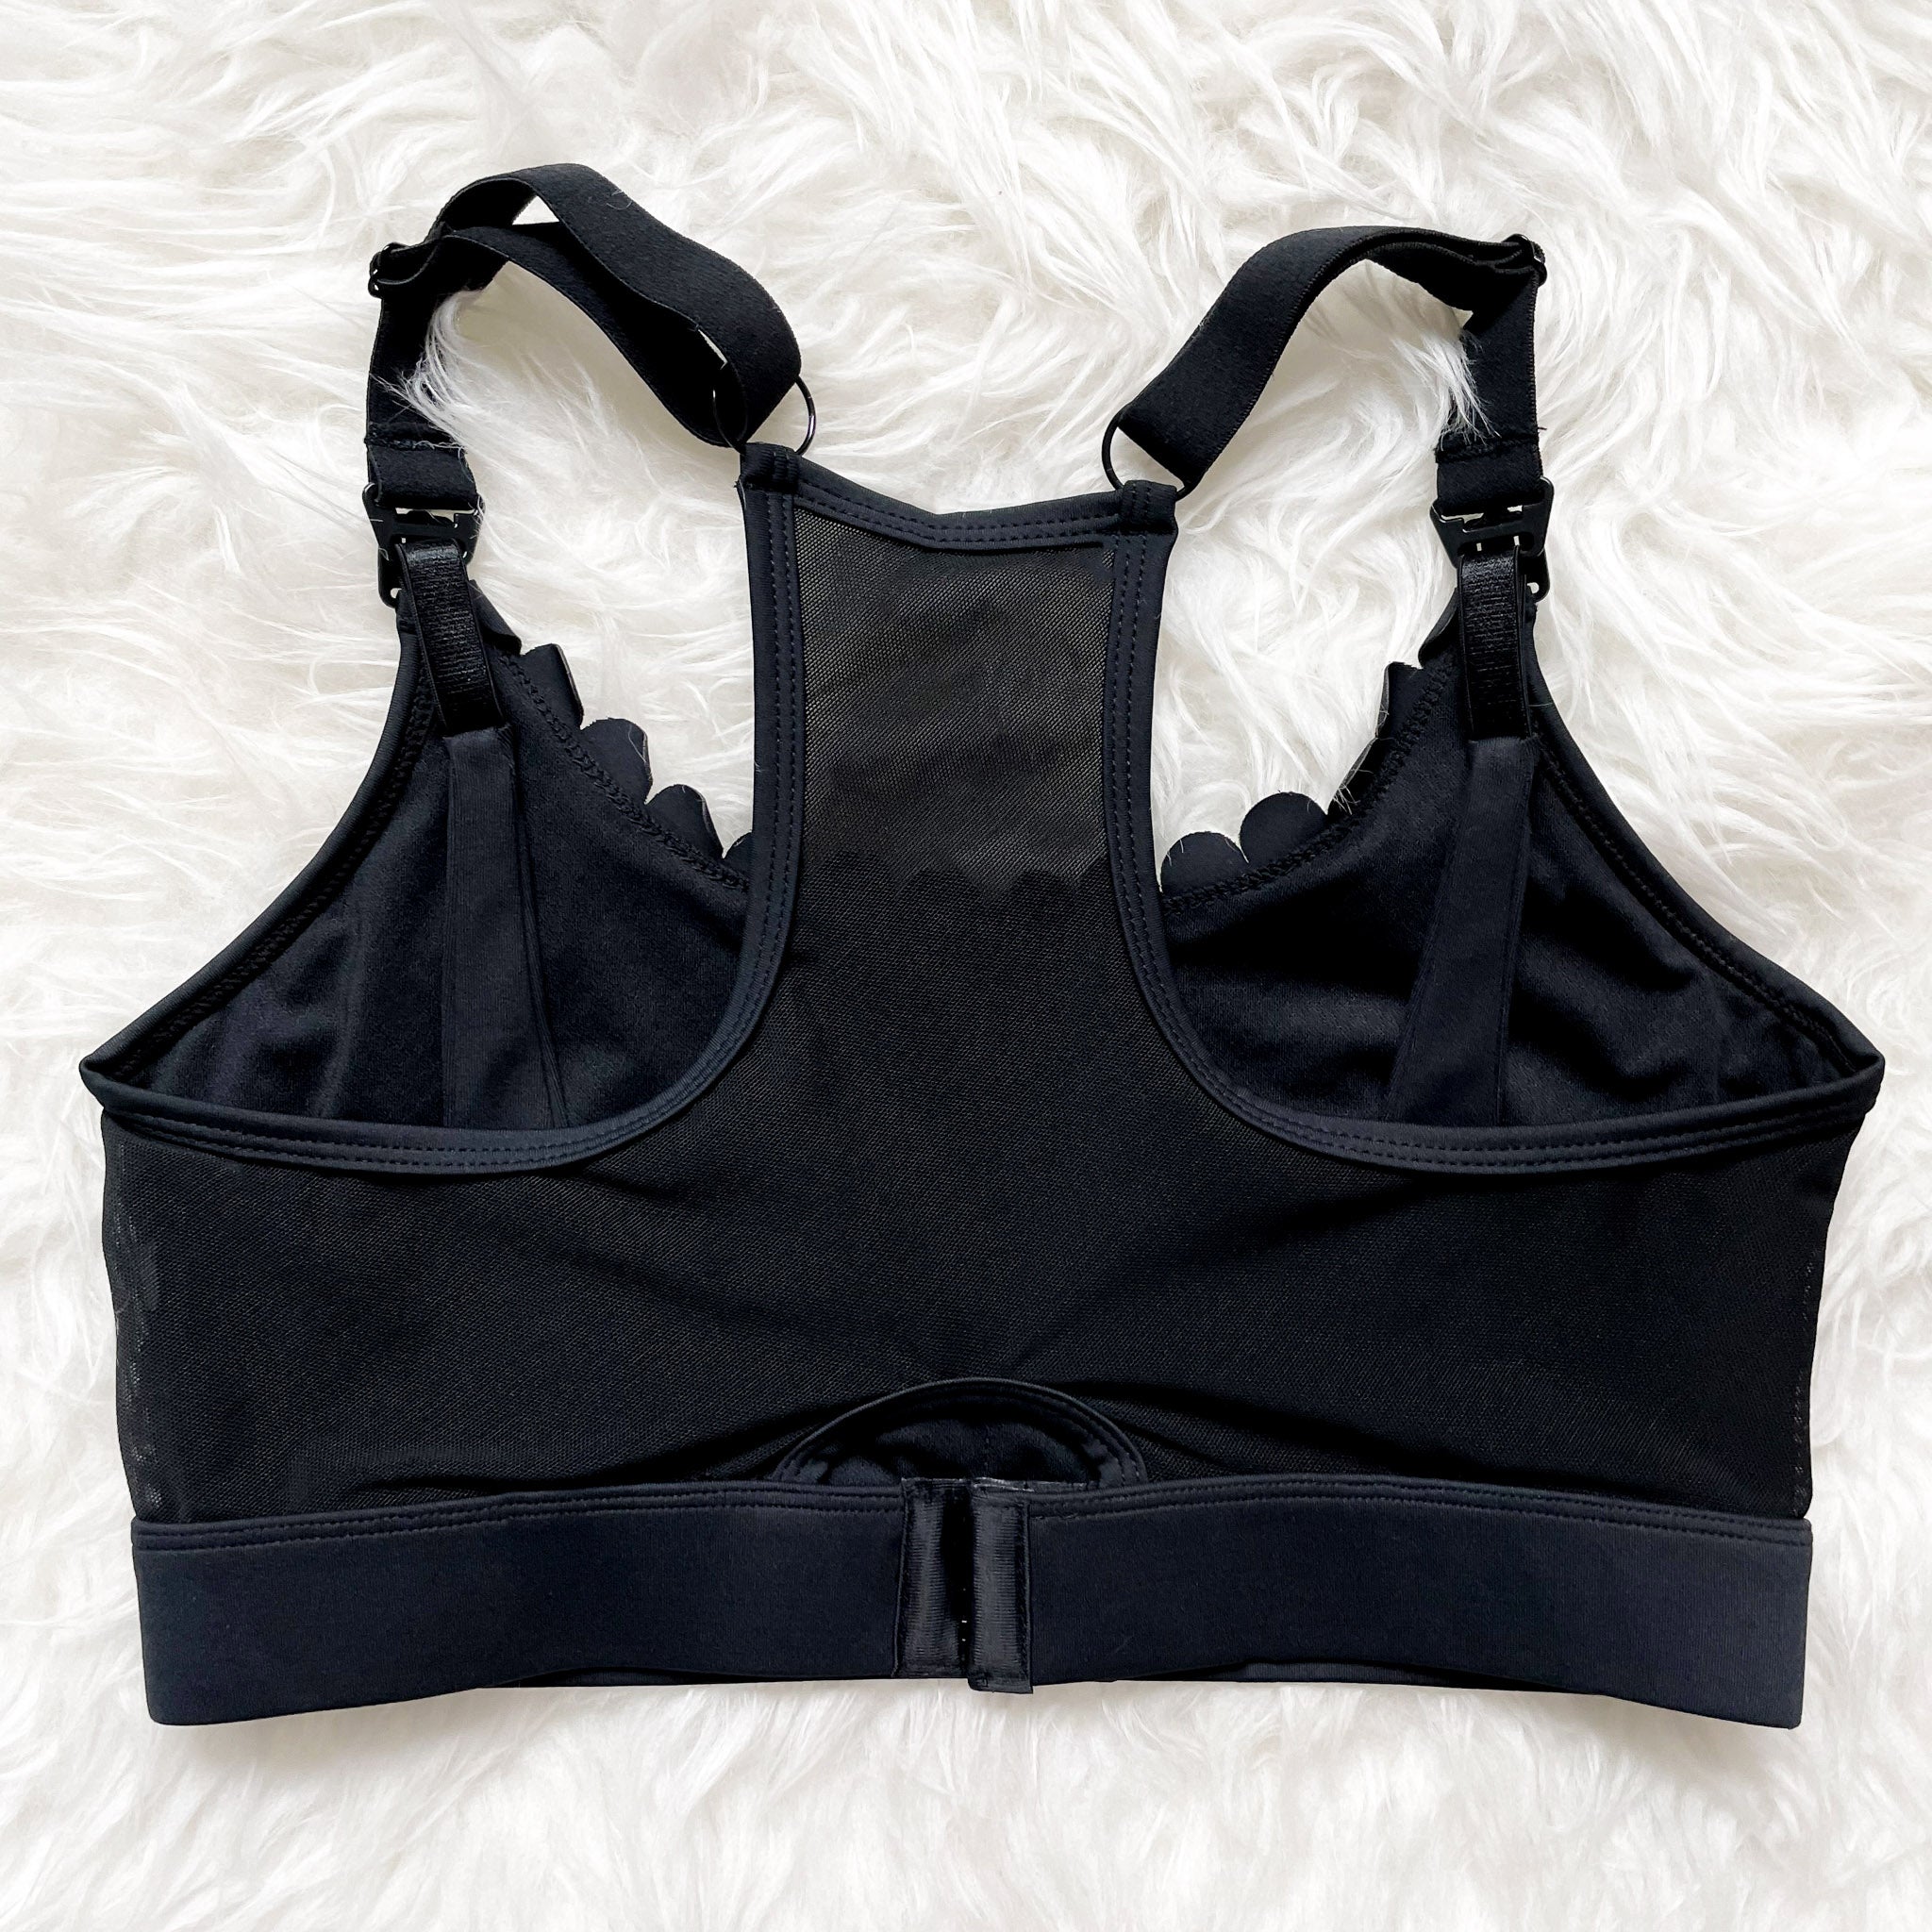 Kimberly Soft Sports Bra, Black  Comfortable High Support for